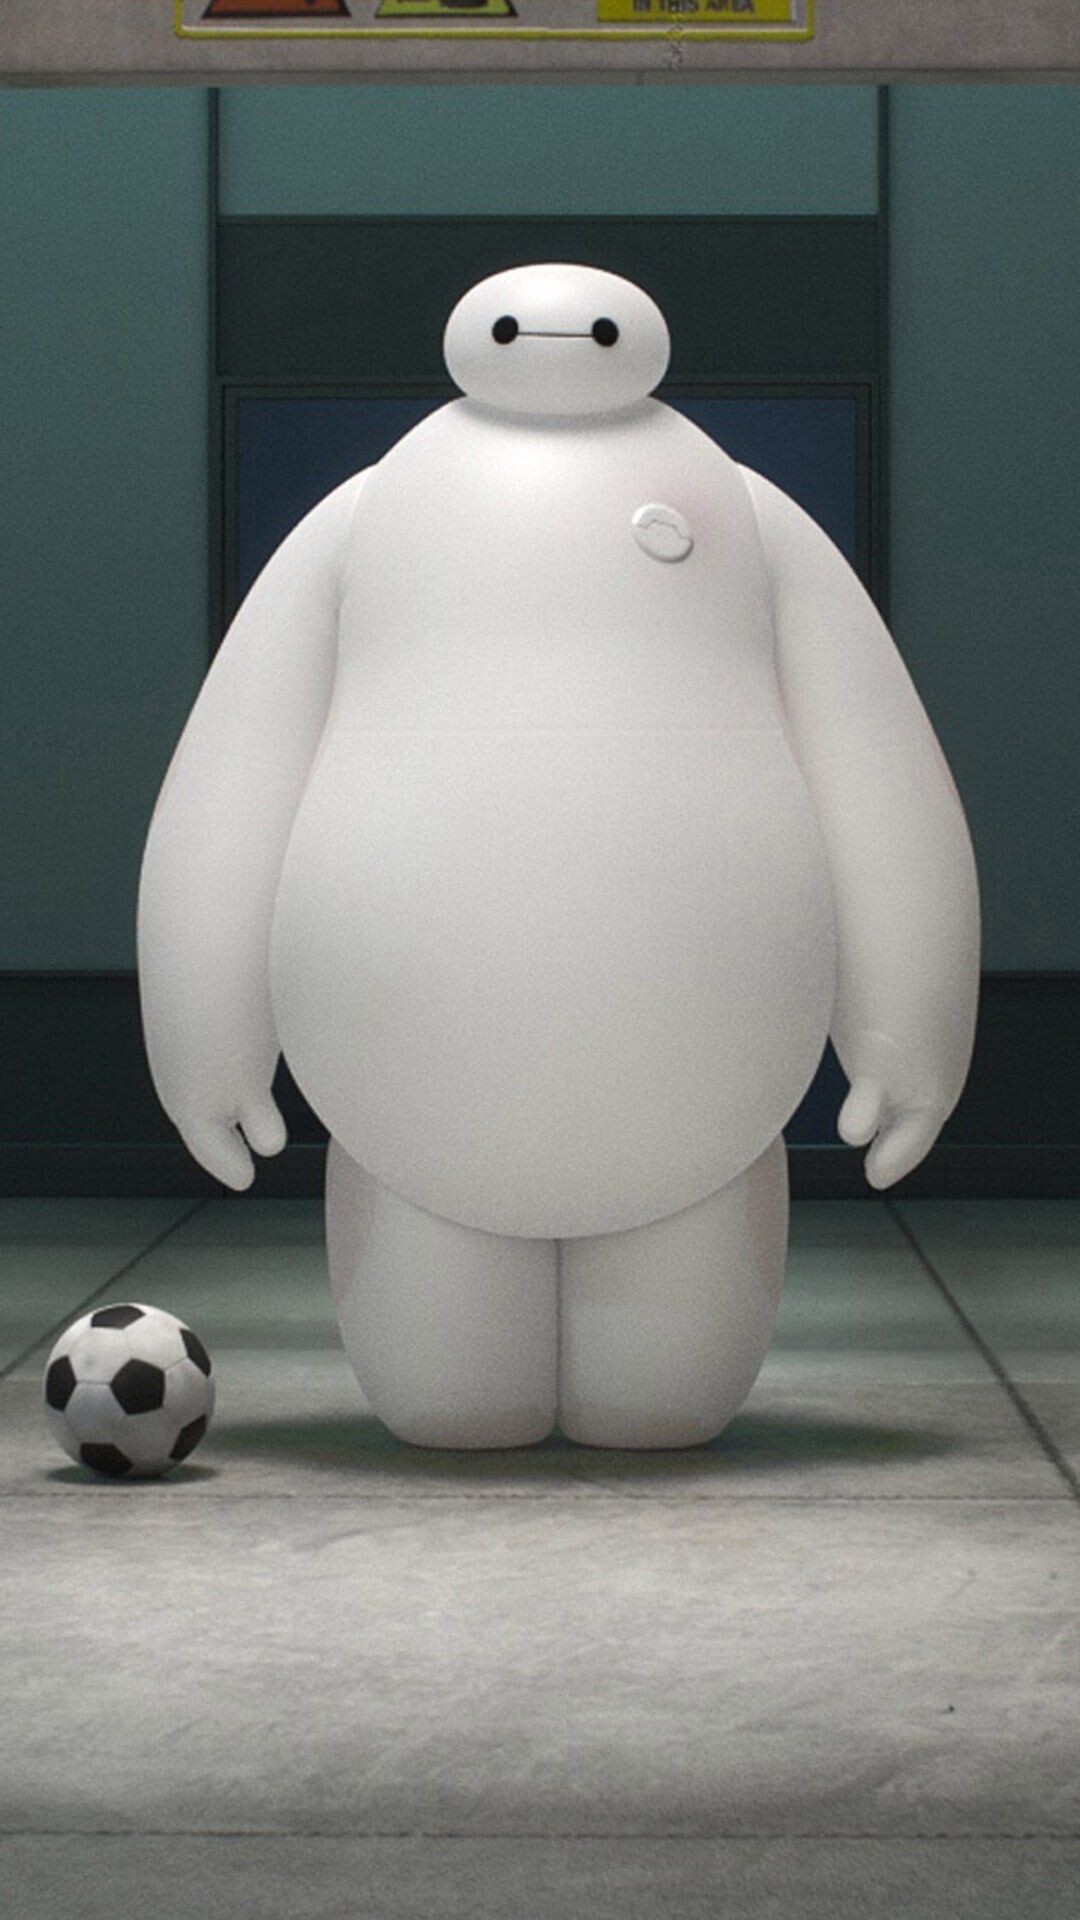 Baymax! (TV Series): An inflatable robot built to serve as a personal healthcare provider companion. 1080x1920 Full HD Wallpaper.